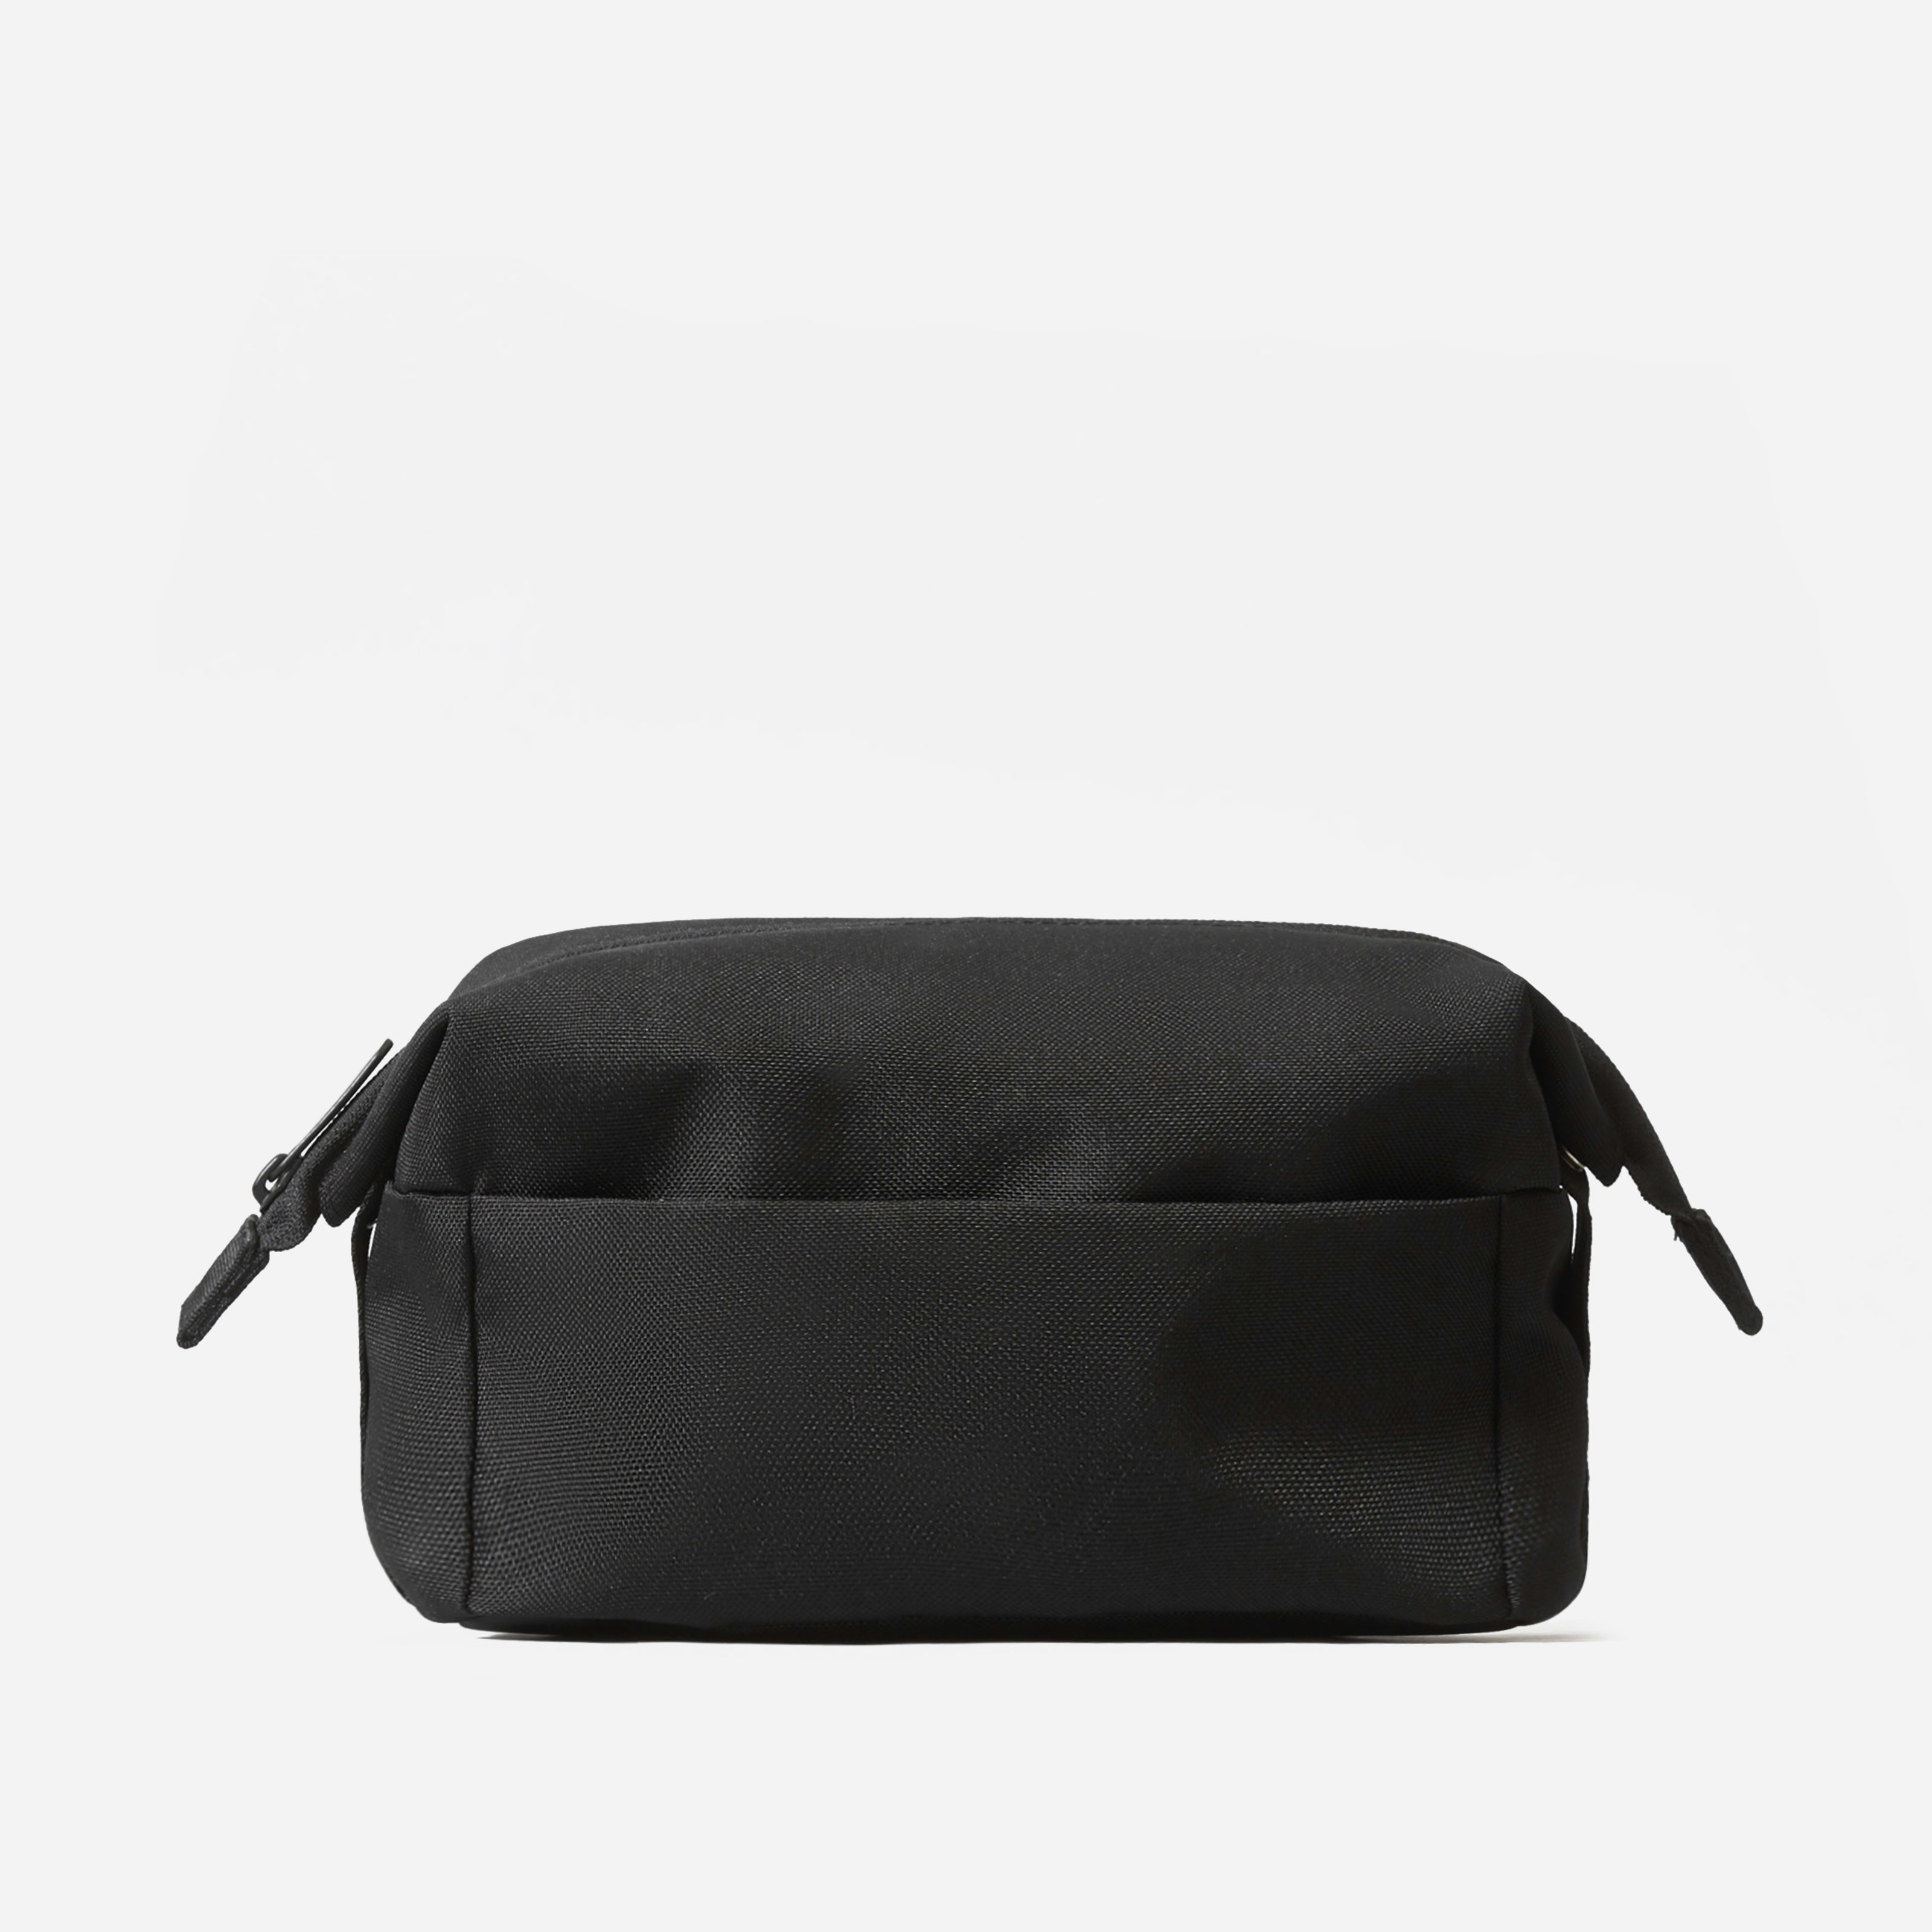 ReNew Catch-All Case by Everlane in Black | Everlane